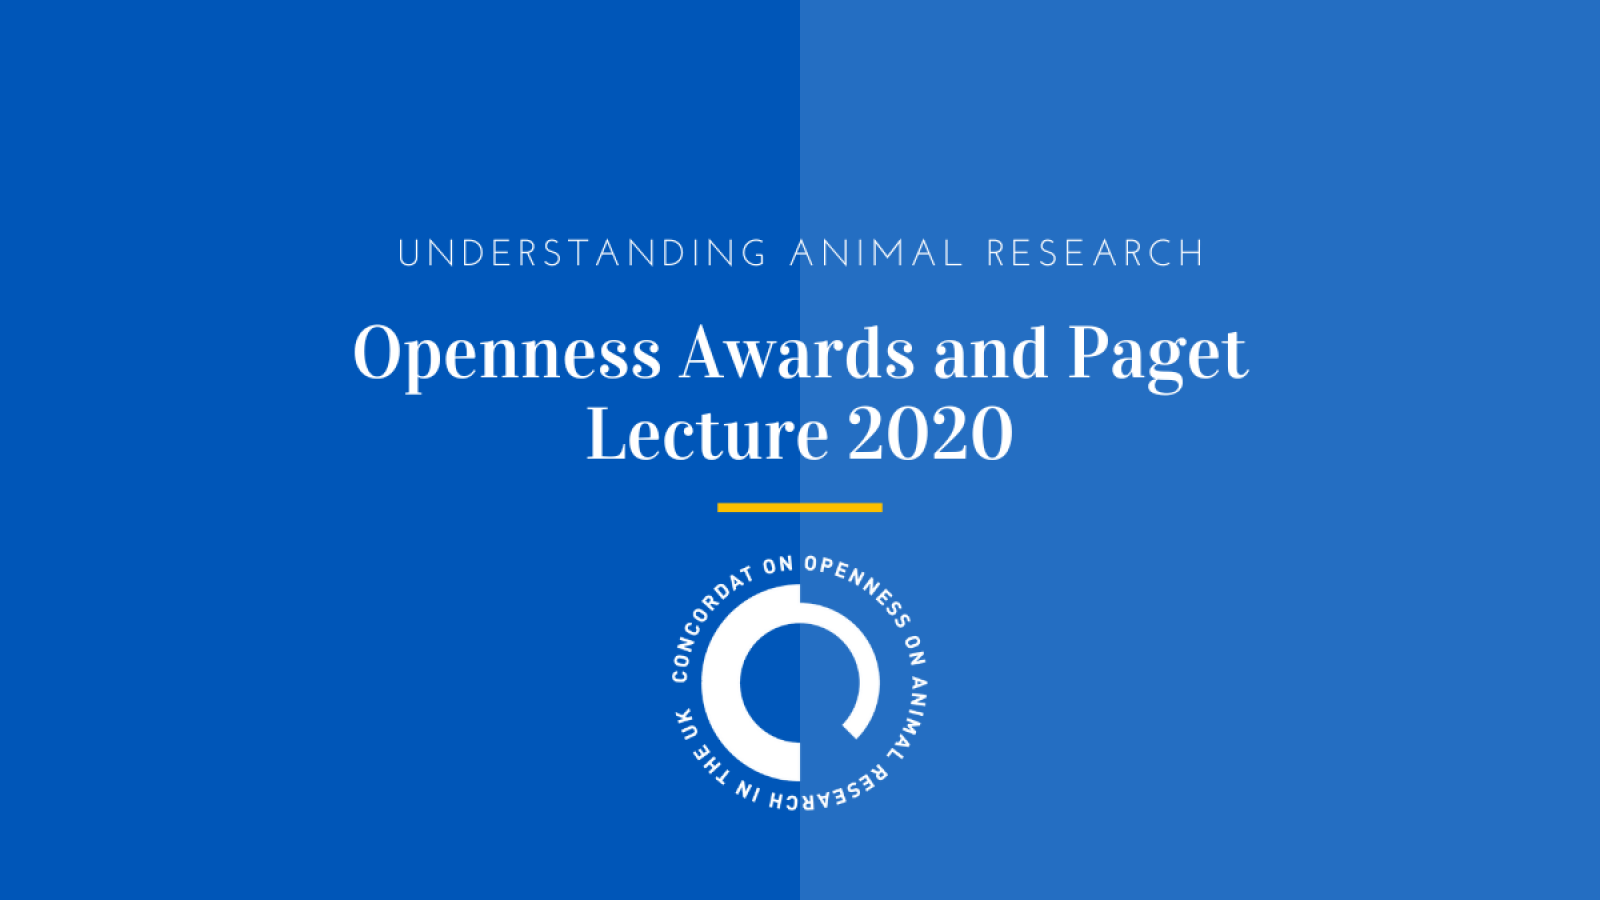 Openness Awards and Paget Lecture 2020